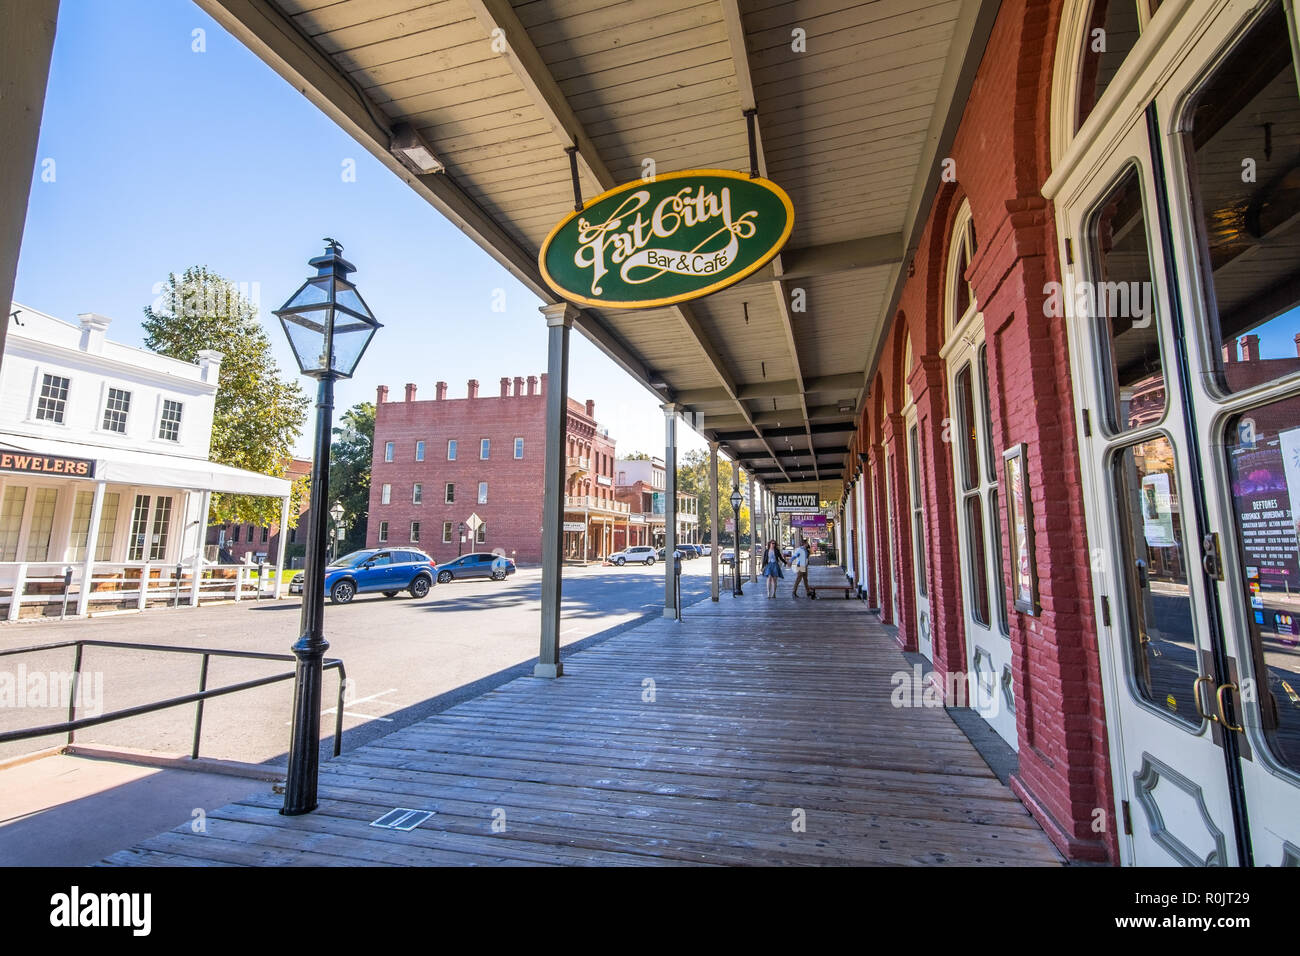 September 22, 2018 Sacramento / CA / USA - Stores and businesses located in the historical part of the city, the old town Stock Photo